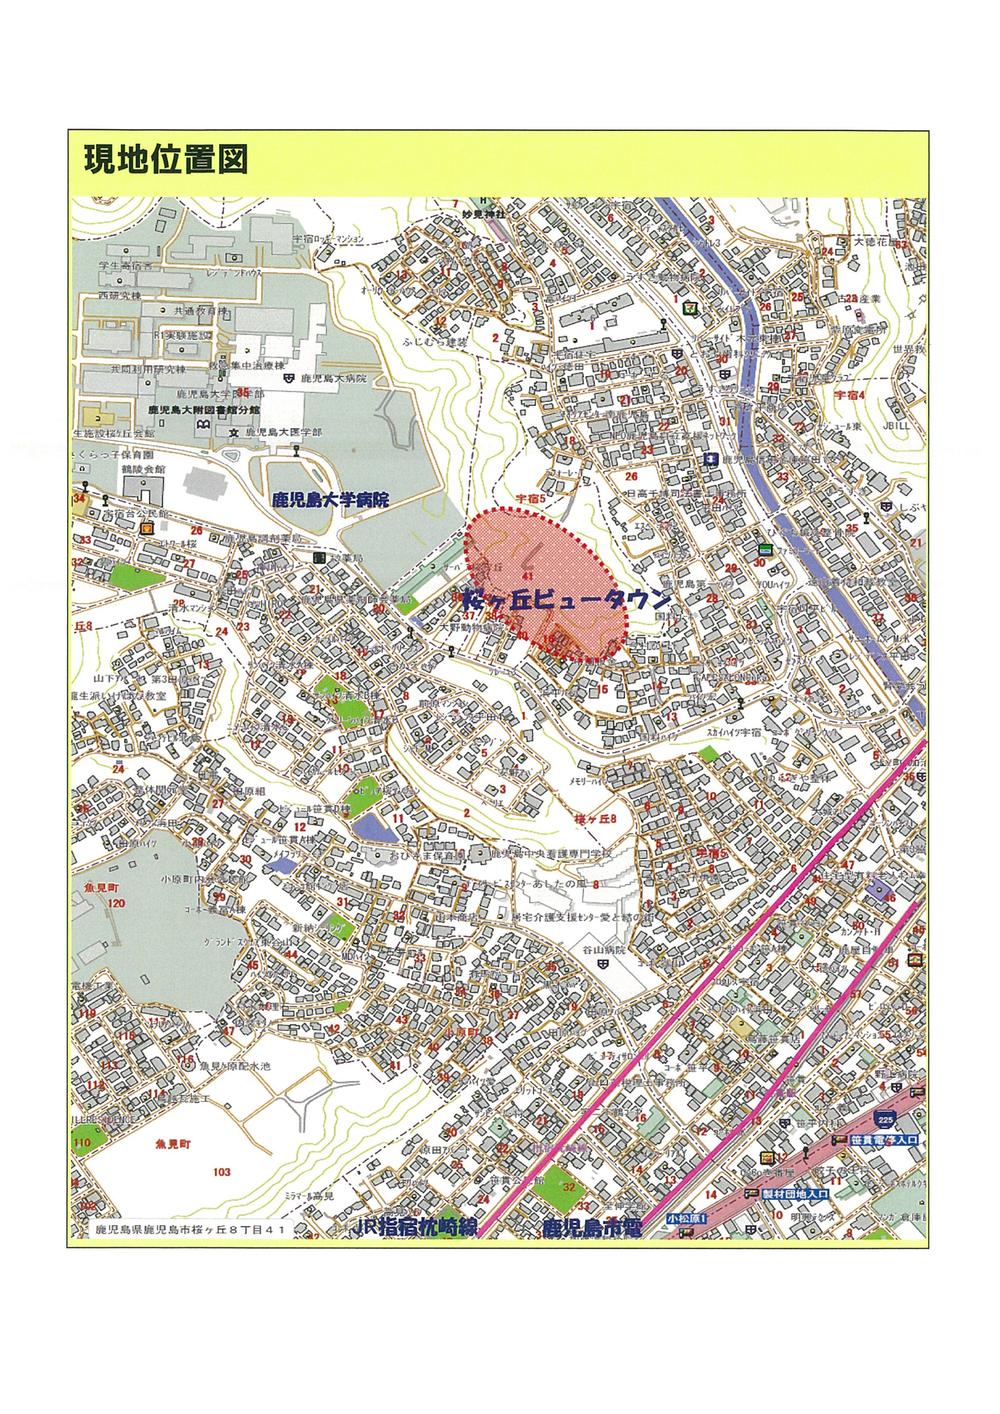 Local guide map. Please come to mark the Kagoshima University hospital